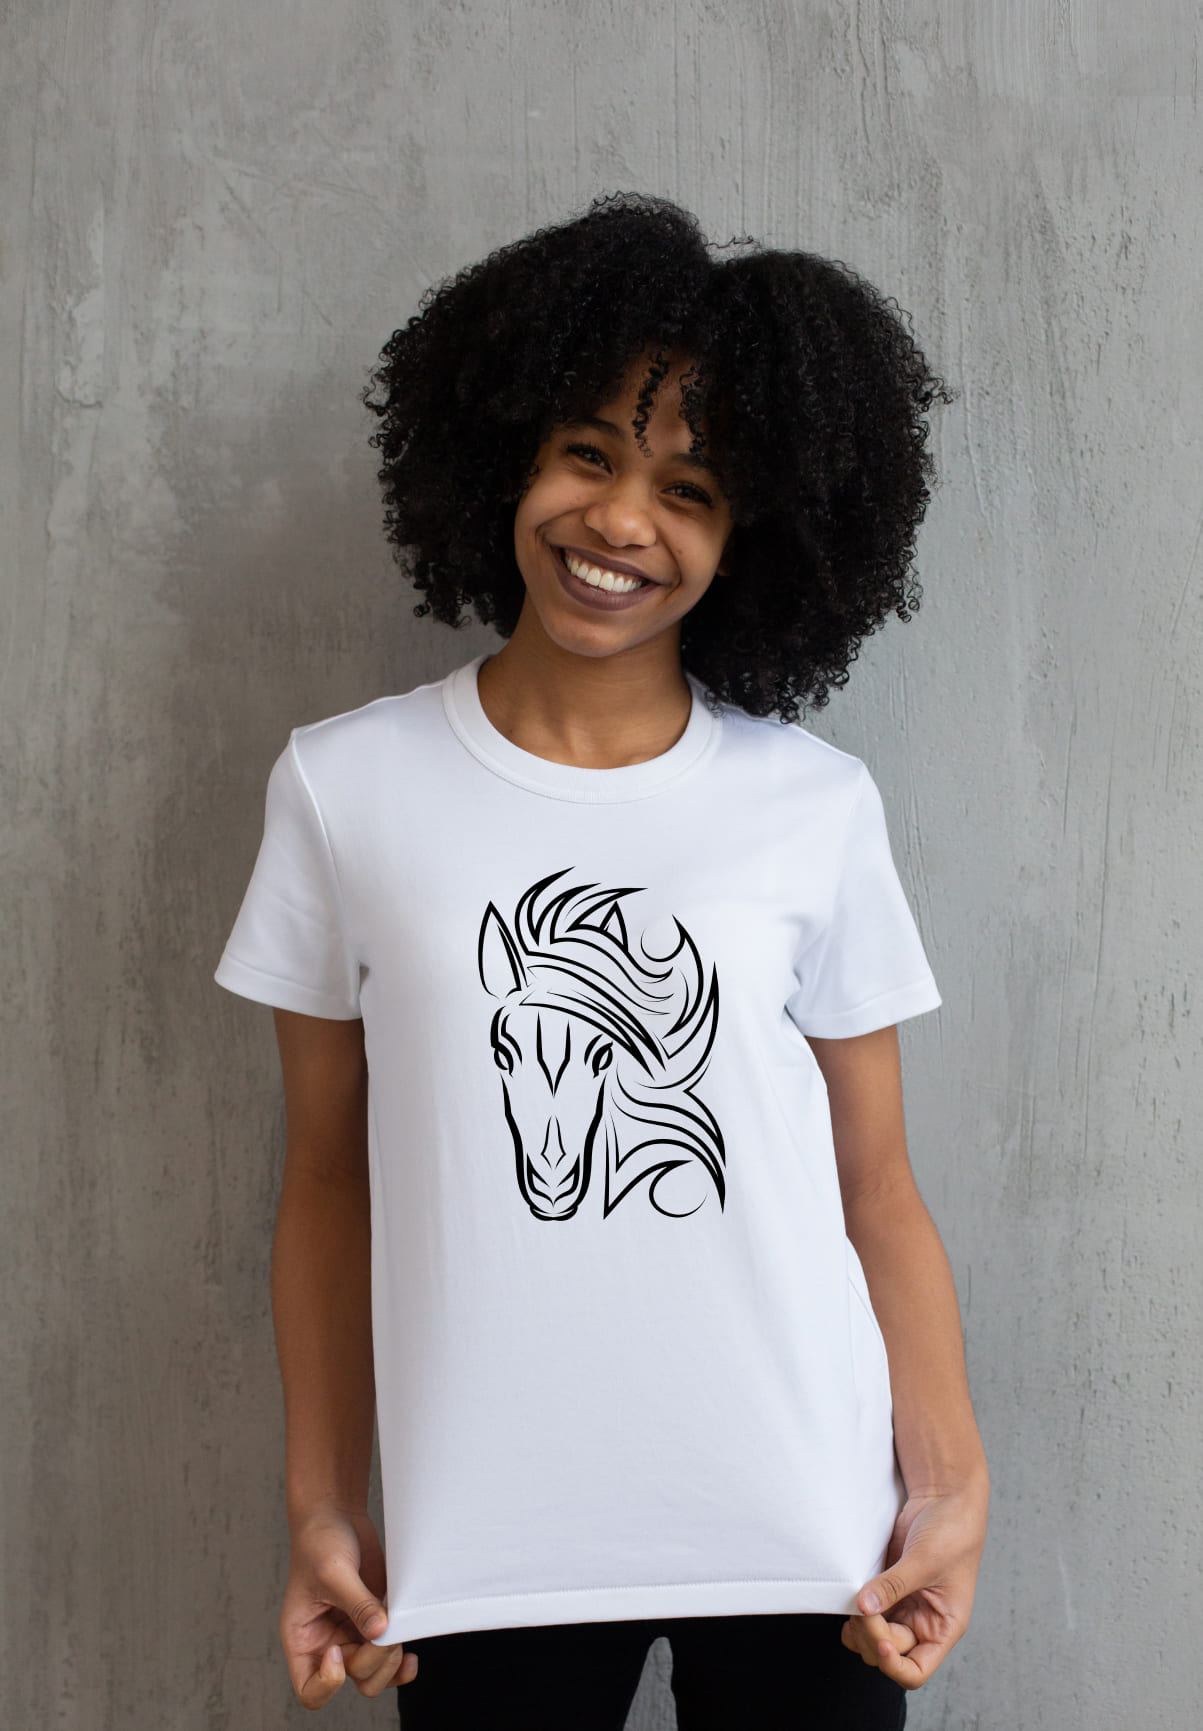 White t-shirt with a black horse face on a girl.